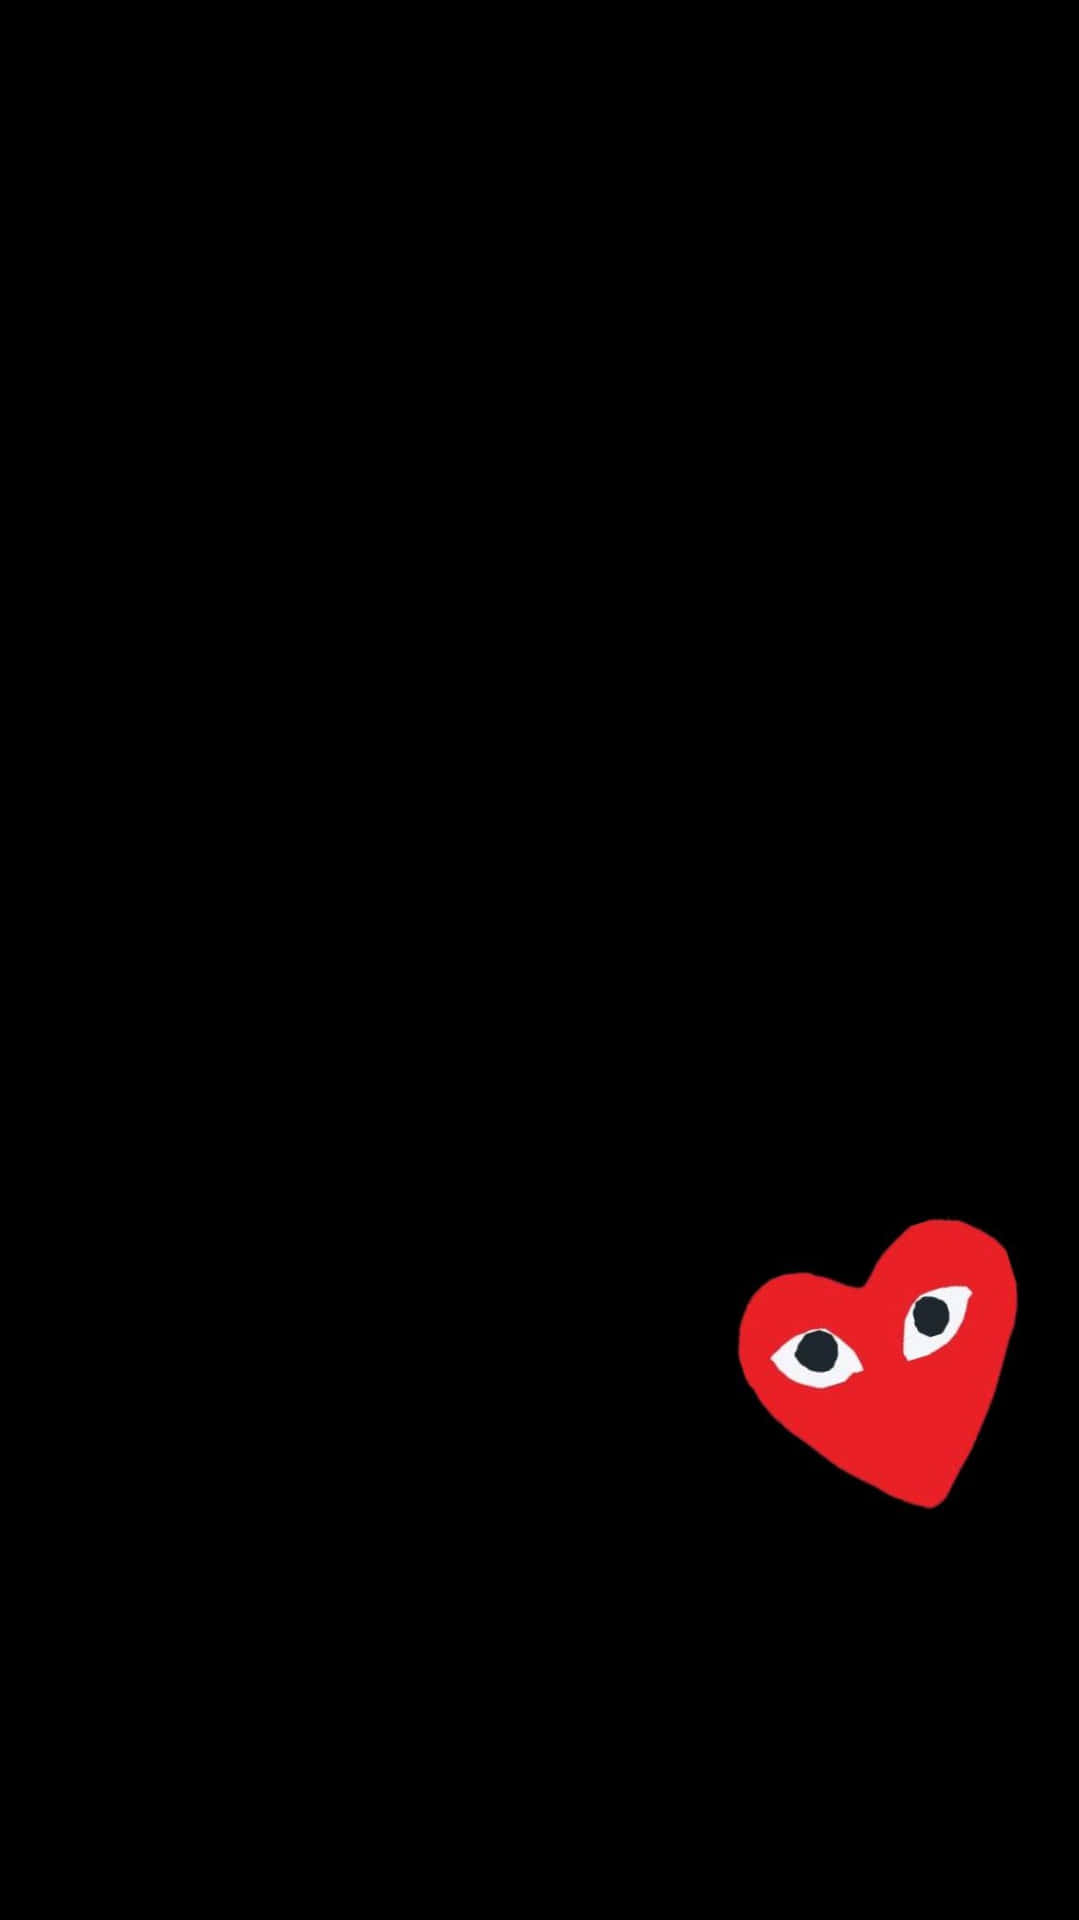 A Red Heart With Eyes On A Black Background Wallpaper